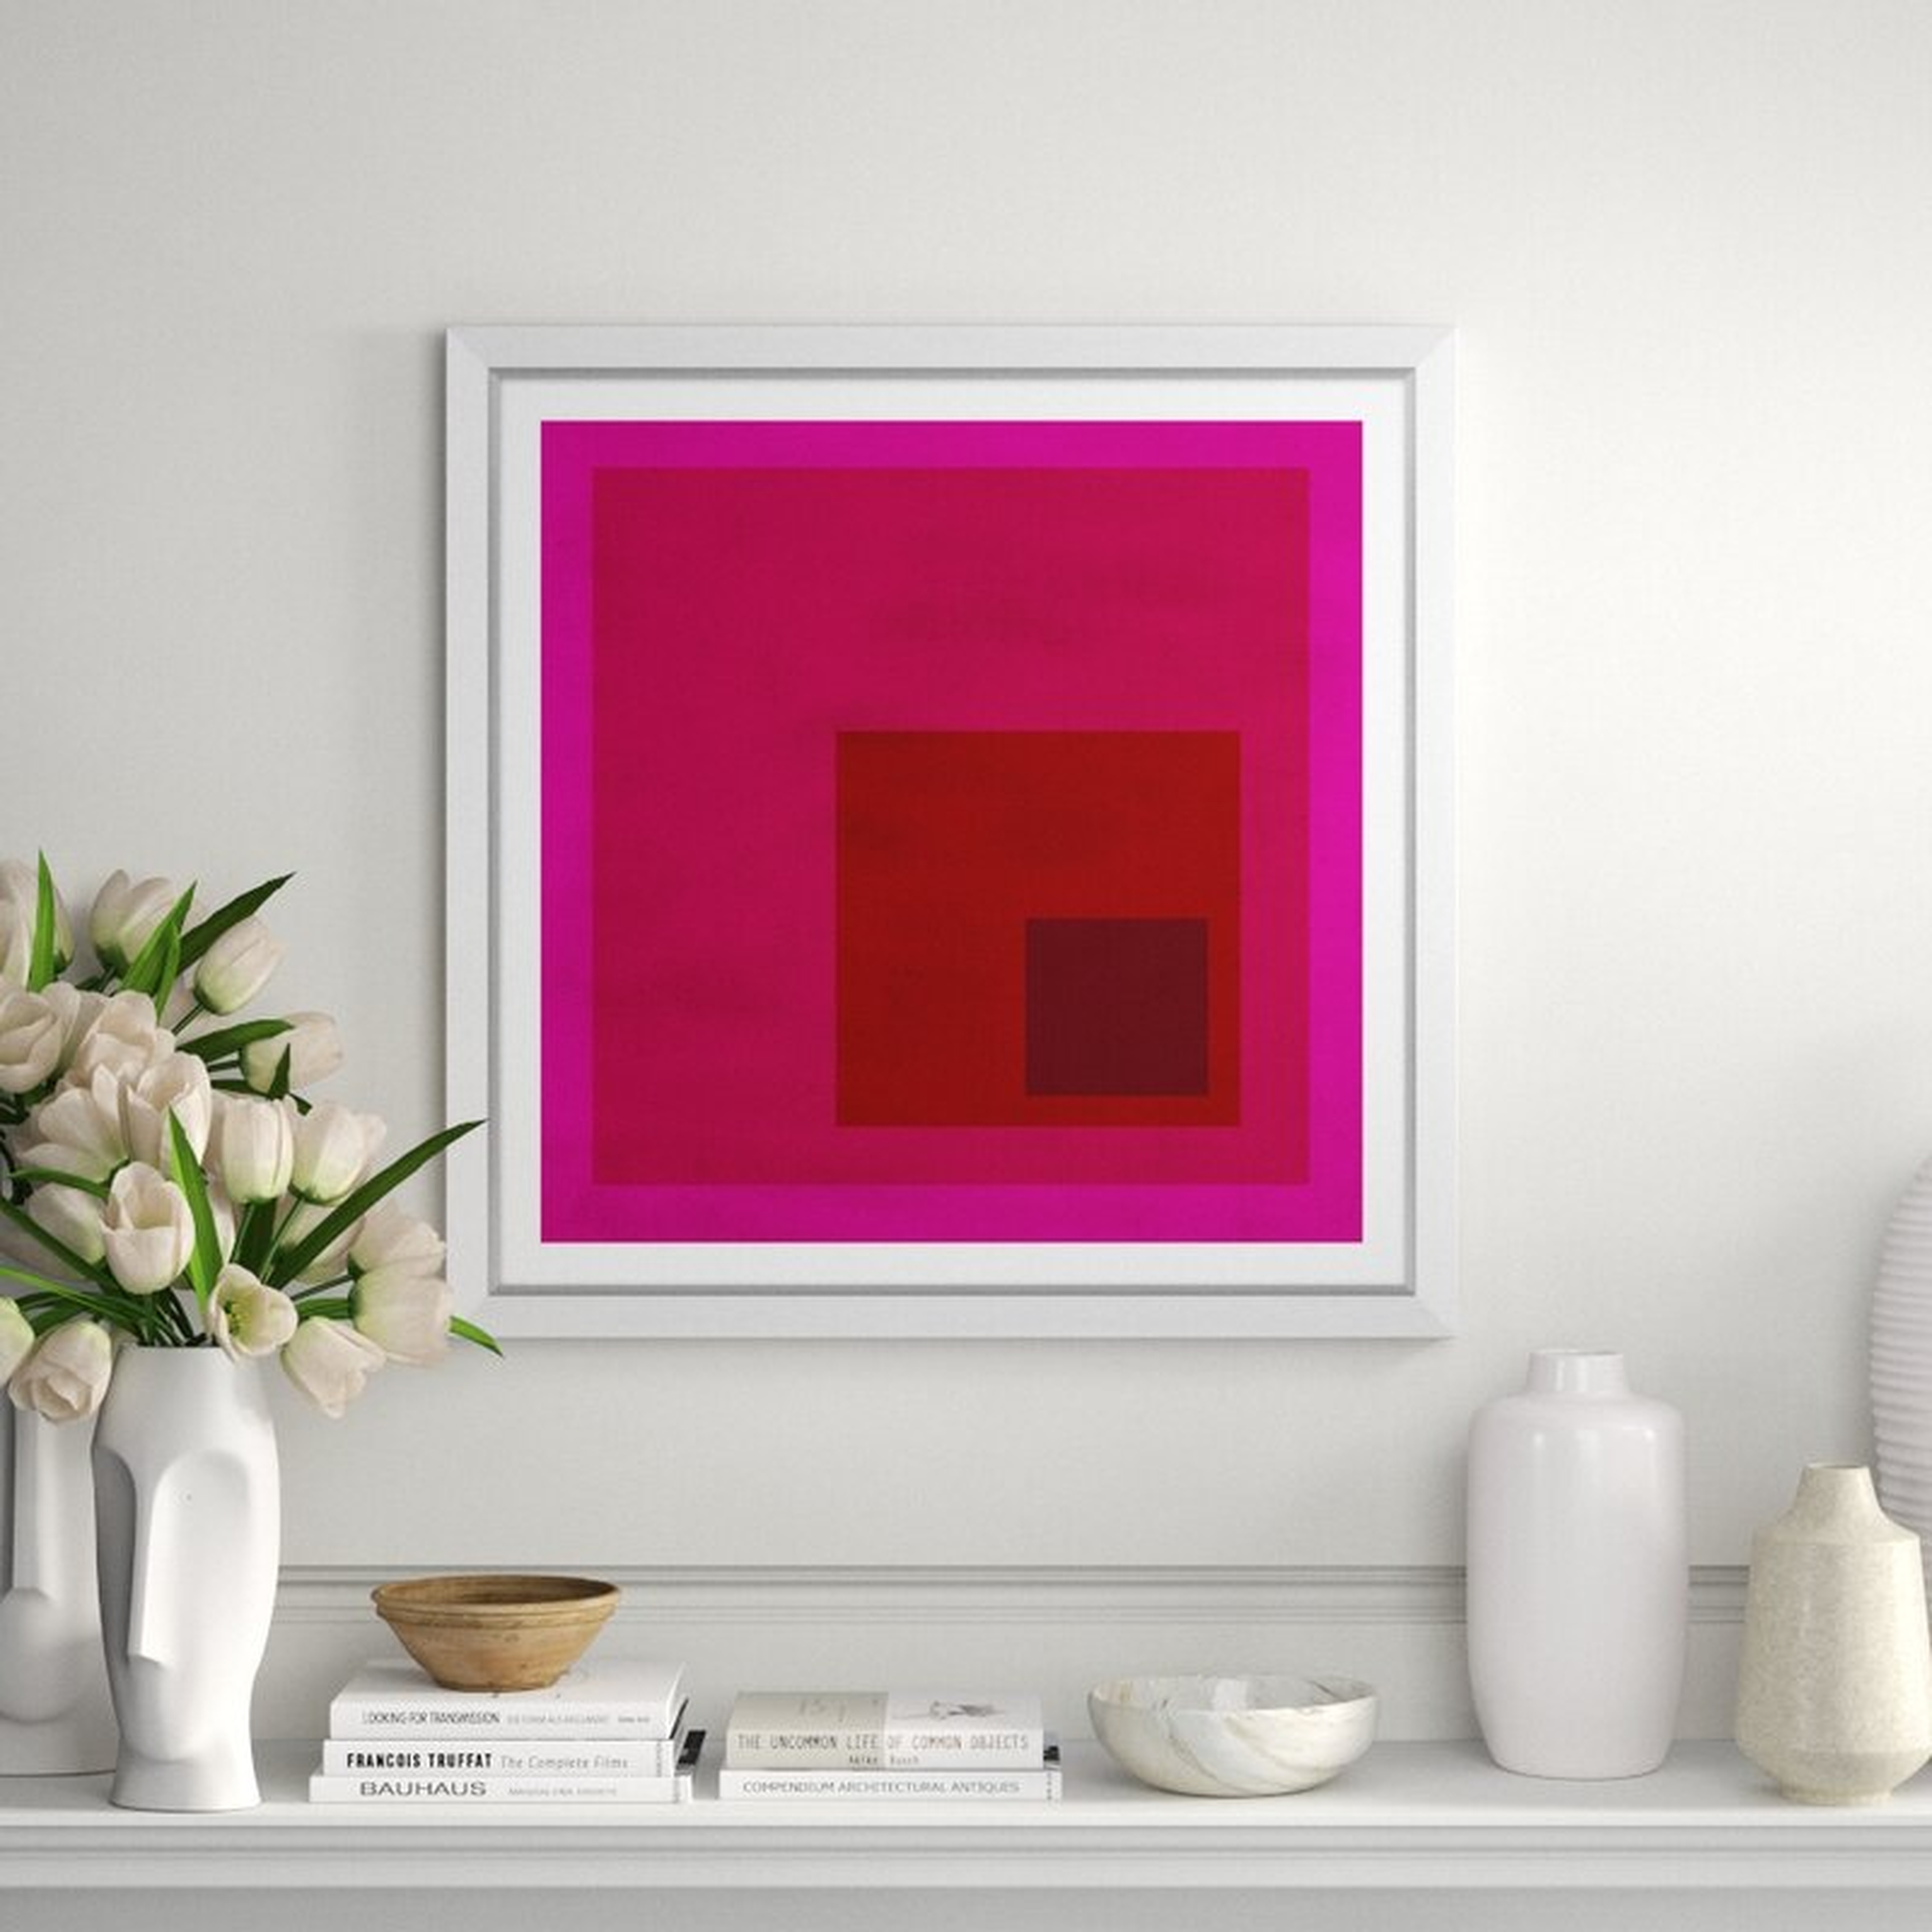 Soicher Marin 'Albers Influence' - Picture Frame Print on Canvas Frame Color: White, Matte Color: White, Size: 33.25" H x 33.25" W x 1.75" D - Perigold